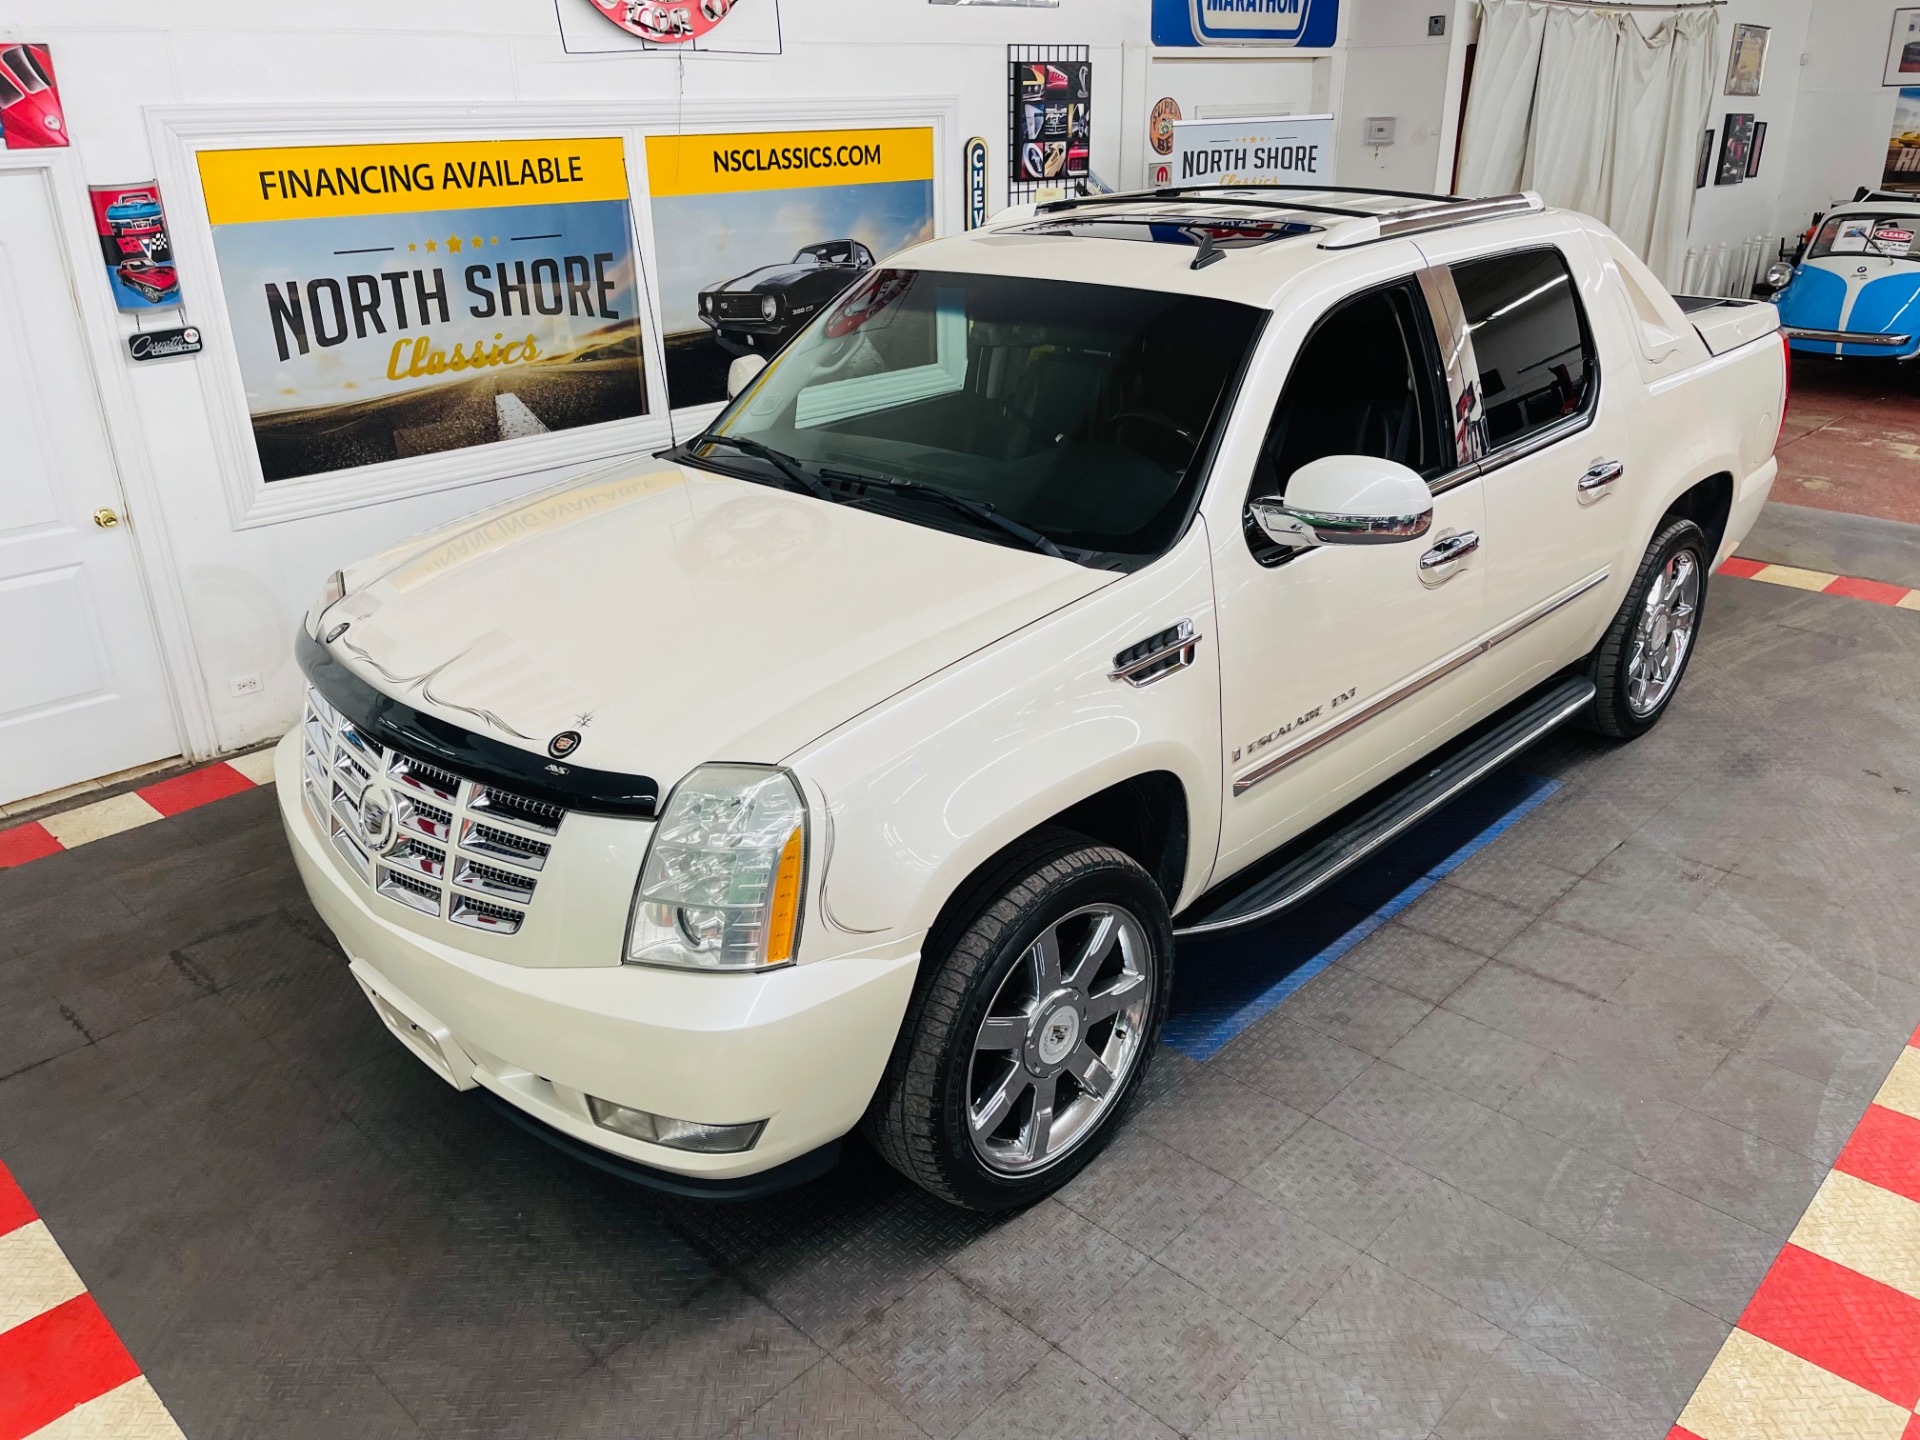 Used 2007 Cadillac Escalade EXT -SEE VIDEO For Sale (Sold) | North Shore  Classics Stock #07621KFCV